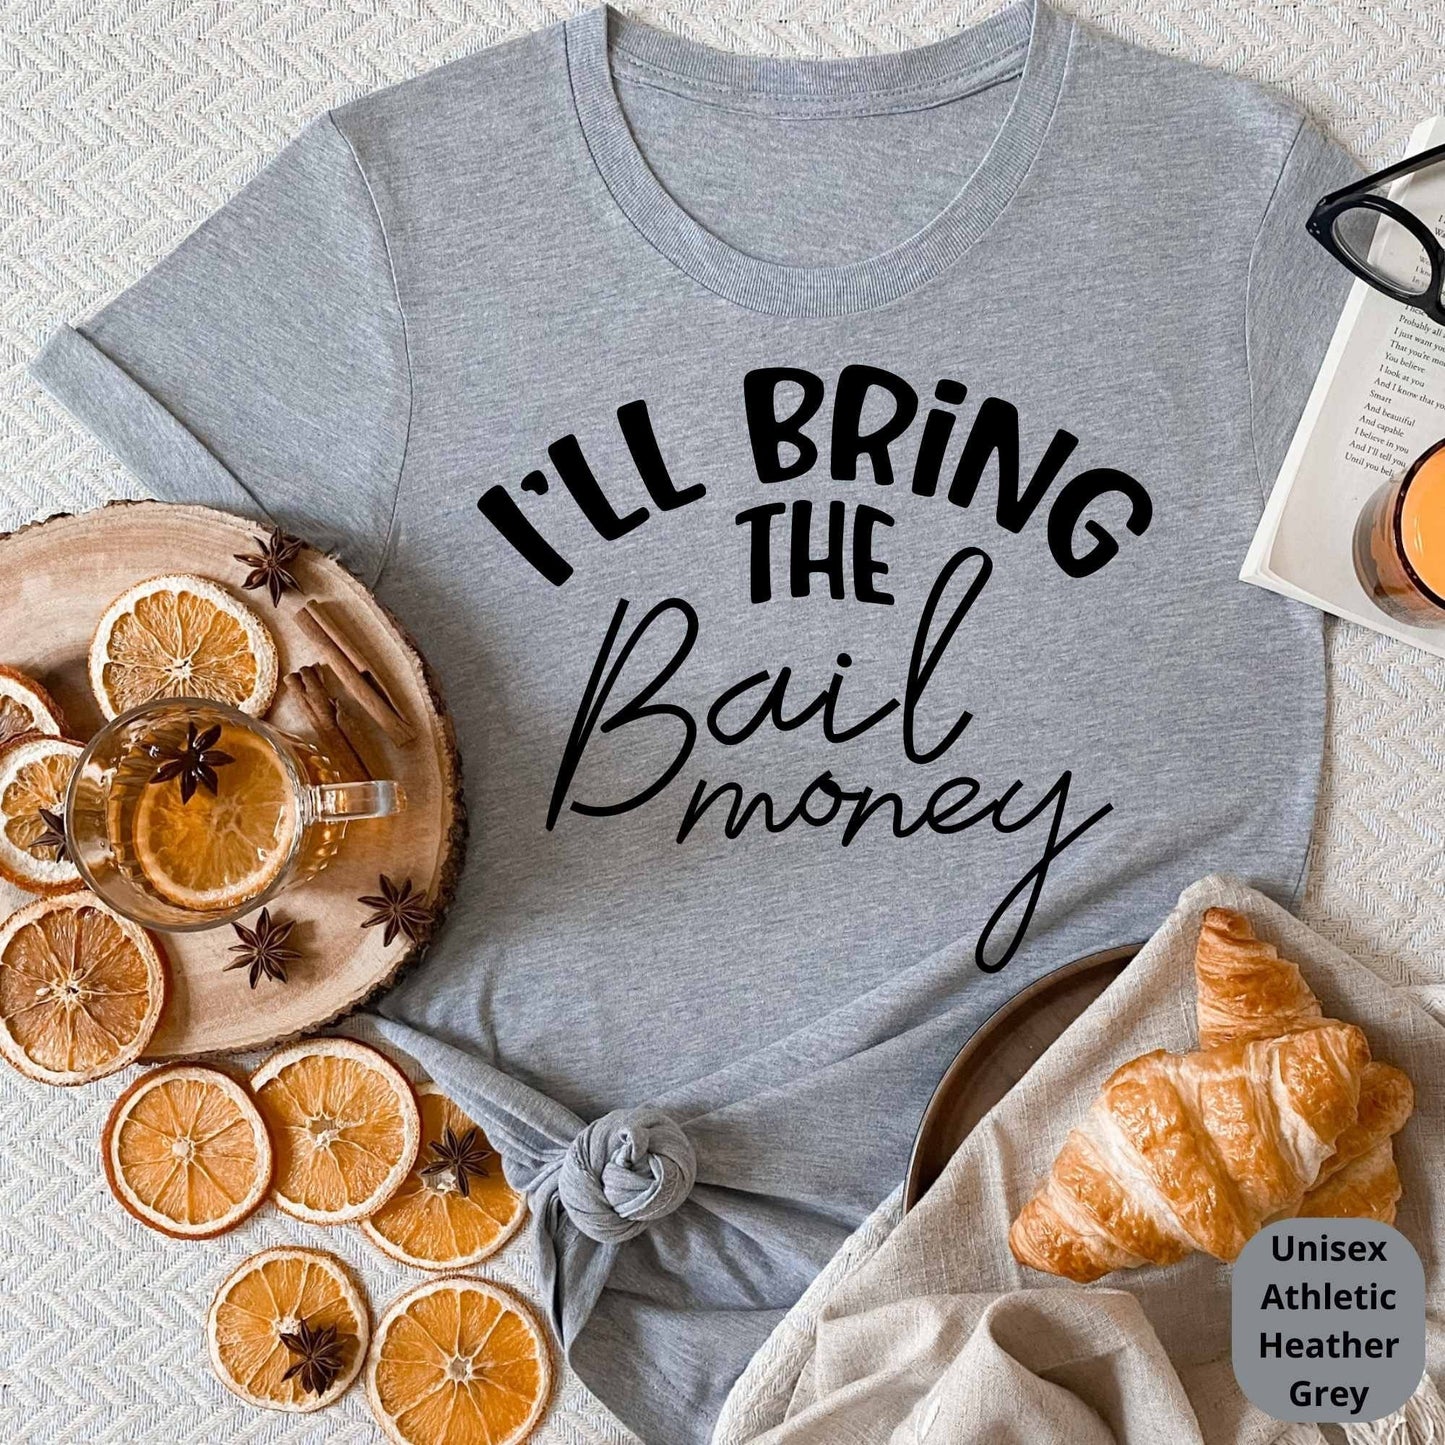 Bachelors Party Shirts, I'll Bring The, Guys Weekend, Funny Groomsmen Gifts, Birthday Party Shirts, Group Celebration T-Shirts, Road Trip